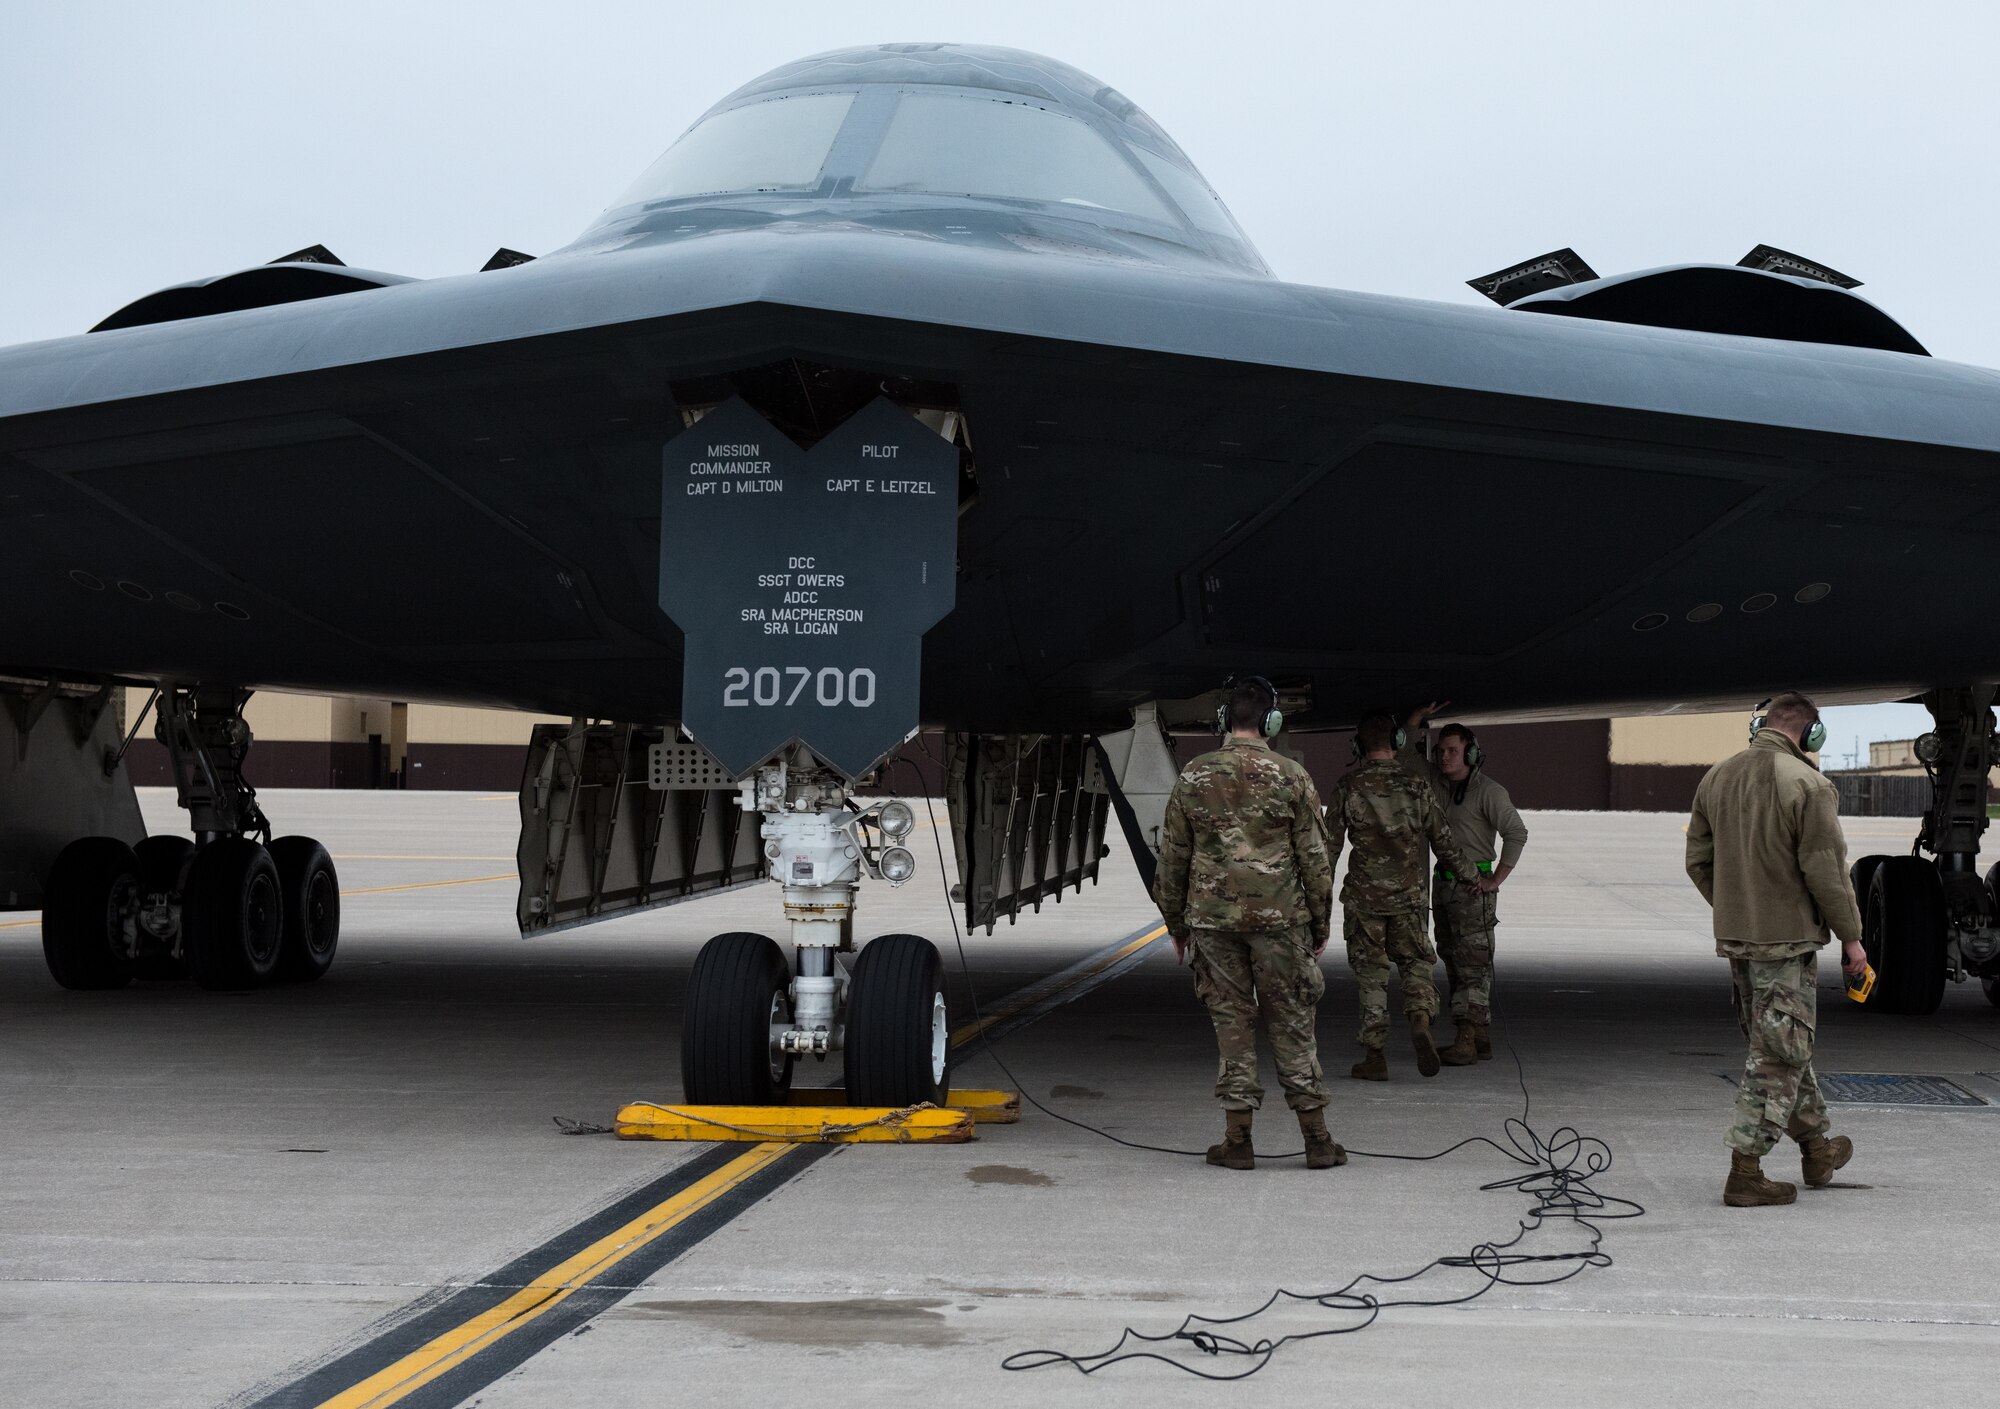 U.S. Air Force Airmen assigned to the 509th Bomb Wing refuel a B-2 Spirit stealth bomber at Whiteman Air Force Base, Missouri, March 18, 2020. This mission allowed the 509th Bomb Wing and the 131st Bomb Wing to work and train together as part of the Total Force Integration. (U.S. Air Force photo by Airman 1st Class Christina Carter)